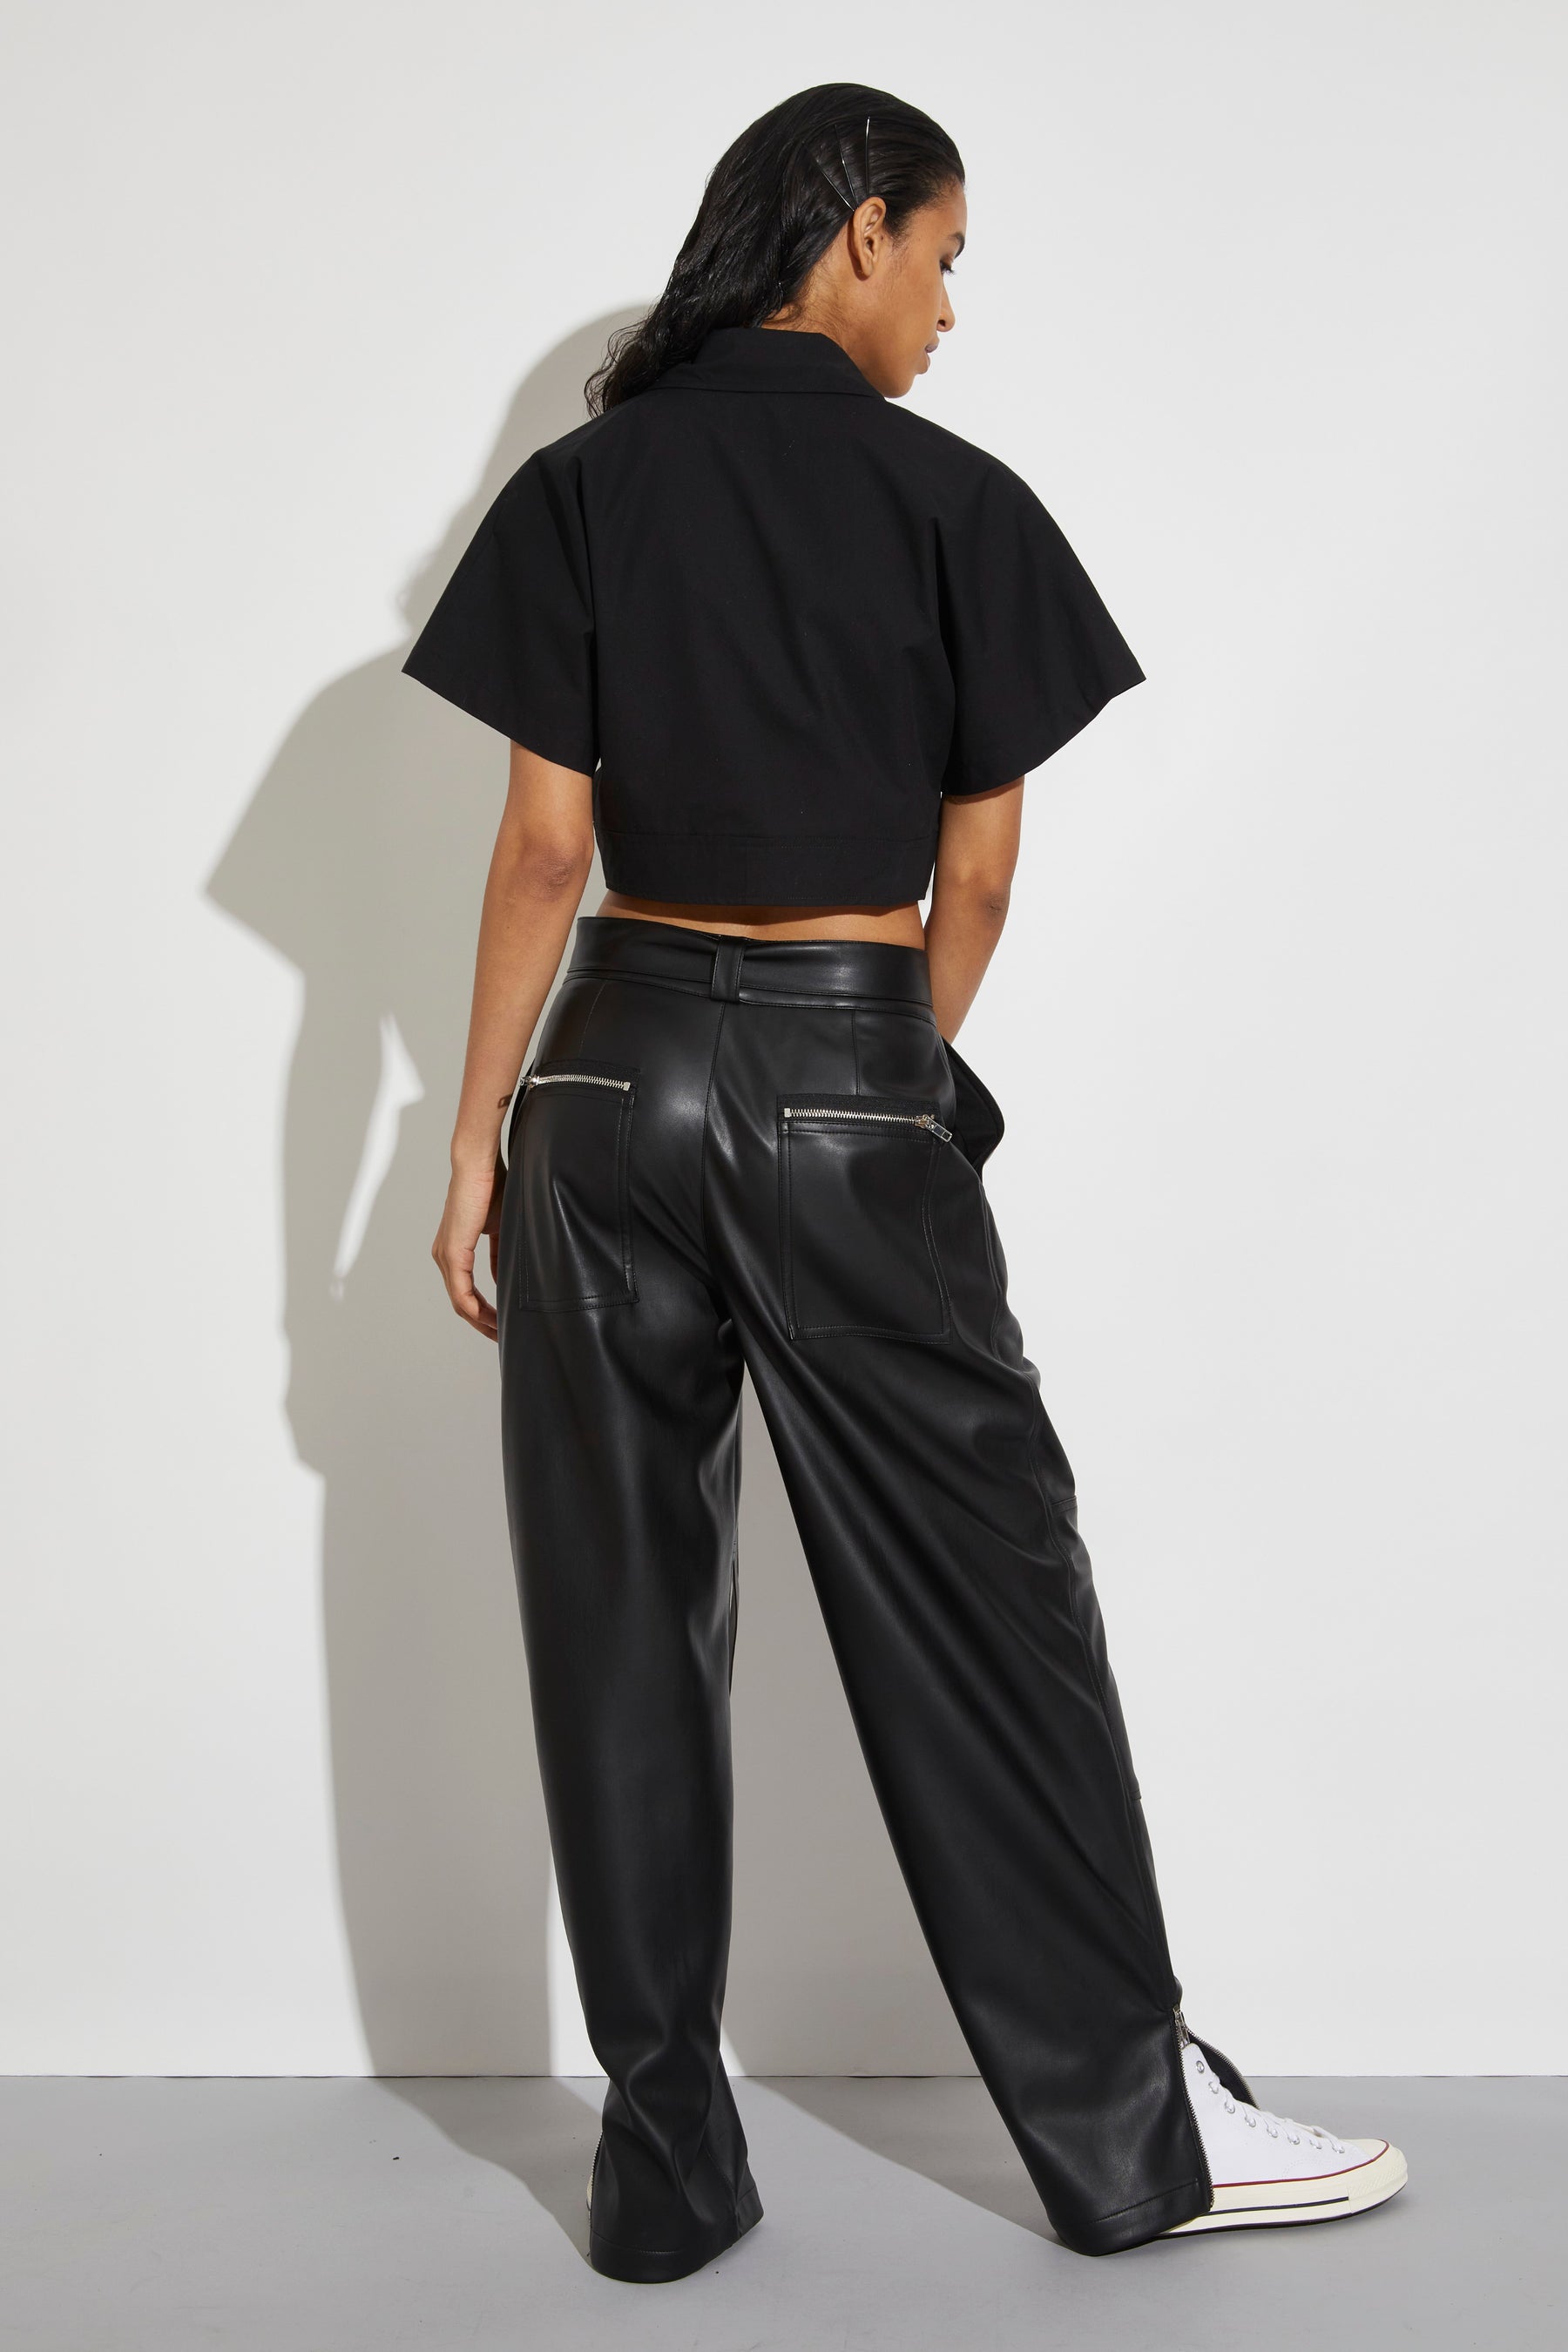 Artistic Leather Skinny Petite Faux Leather Trousers For Women Sexy Solid  Pencil Pants With Fashions From Here_well, $35.62